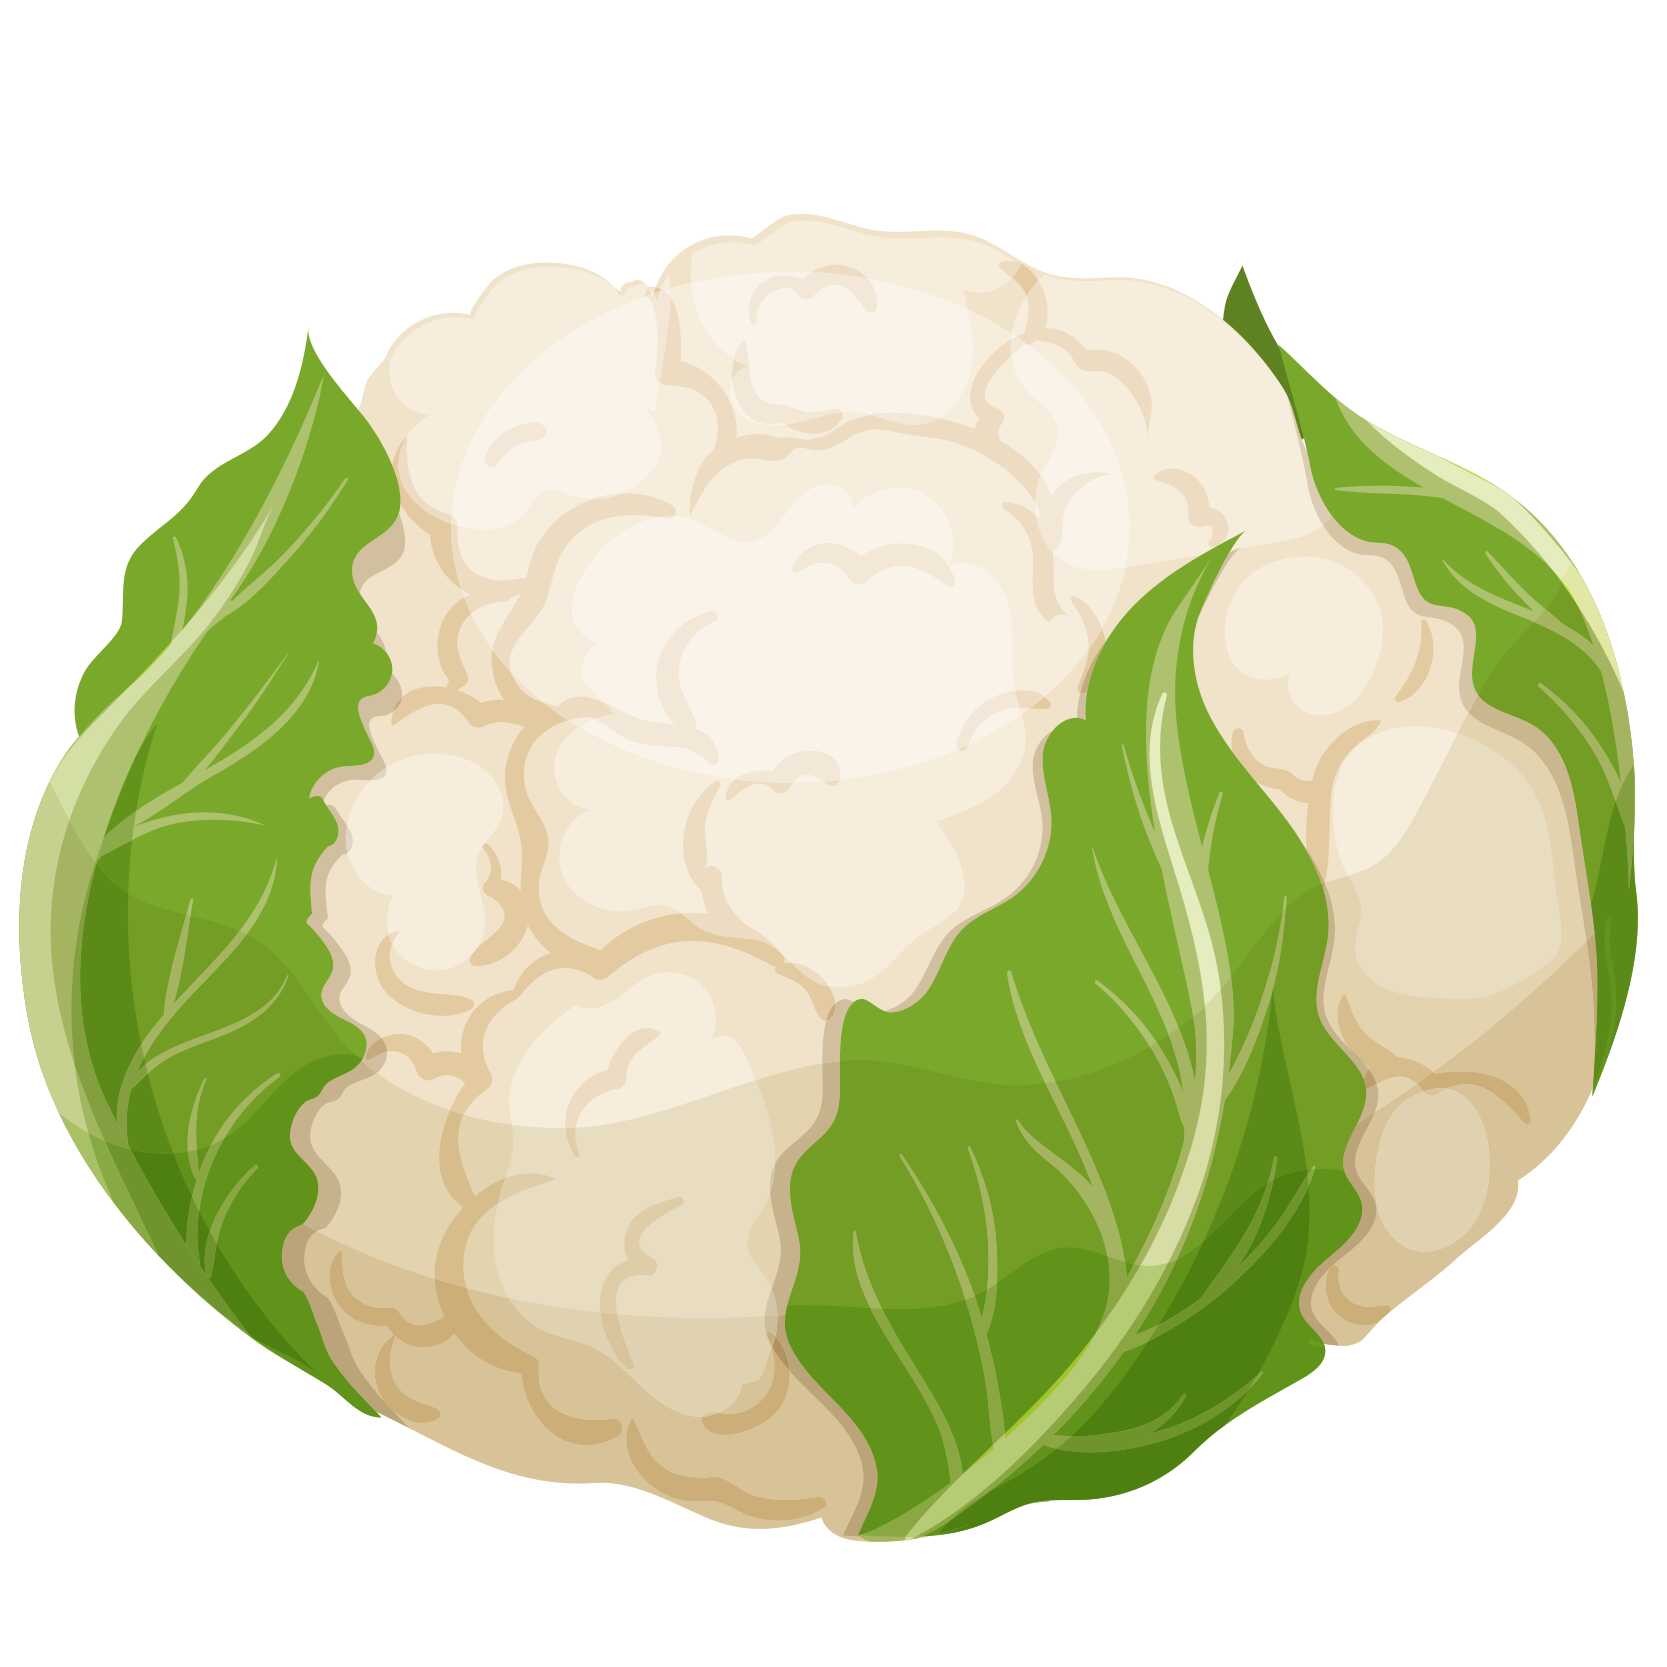 English vocabulary with pictures - Cauliflower